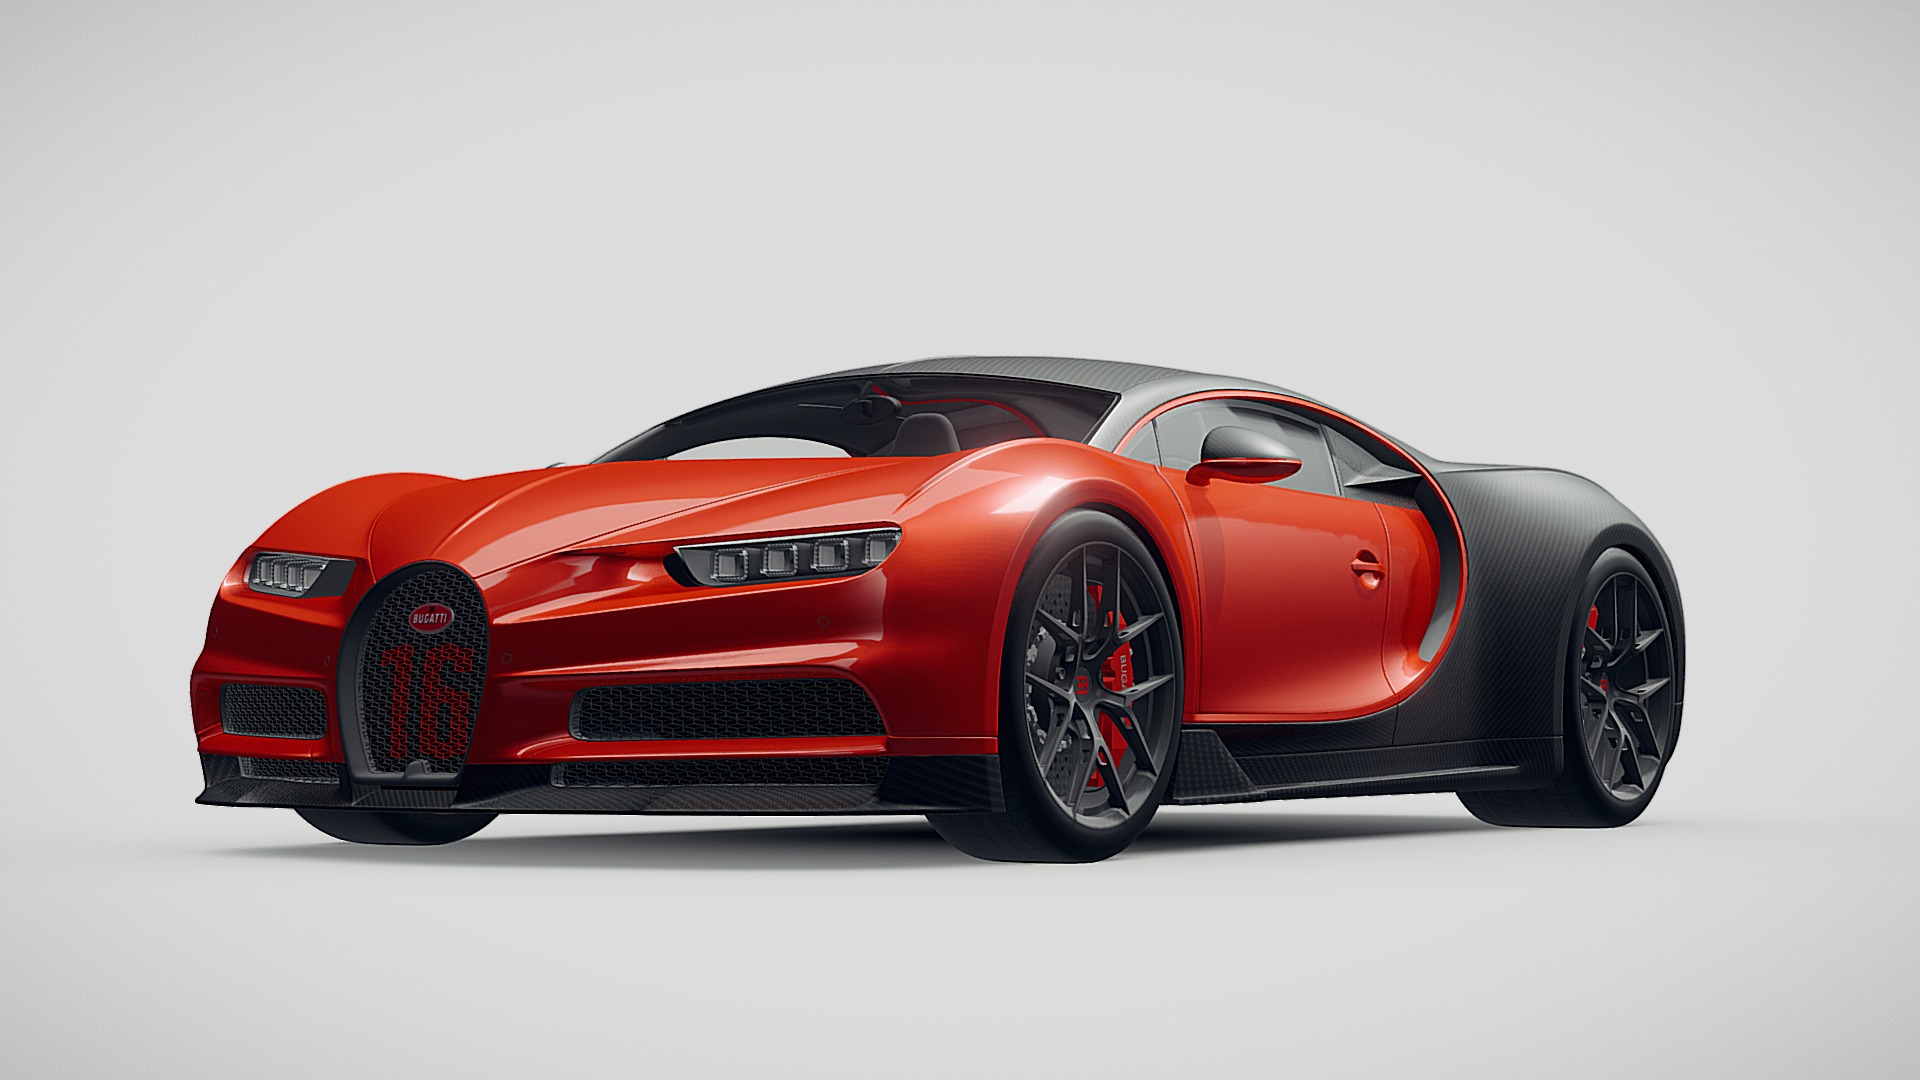 3D model Bugatti Chiron Sport 2019 - This is a 3D model of the Bugatti Chiron Sport 2019. The 3D model is about a red sports car.